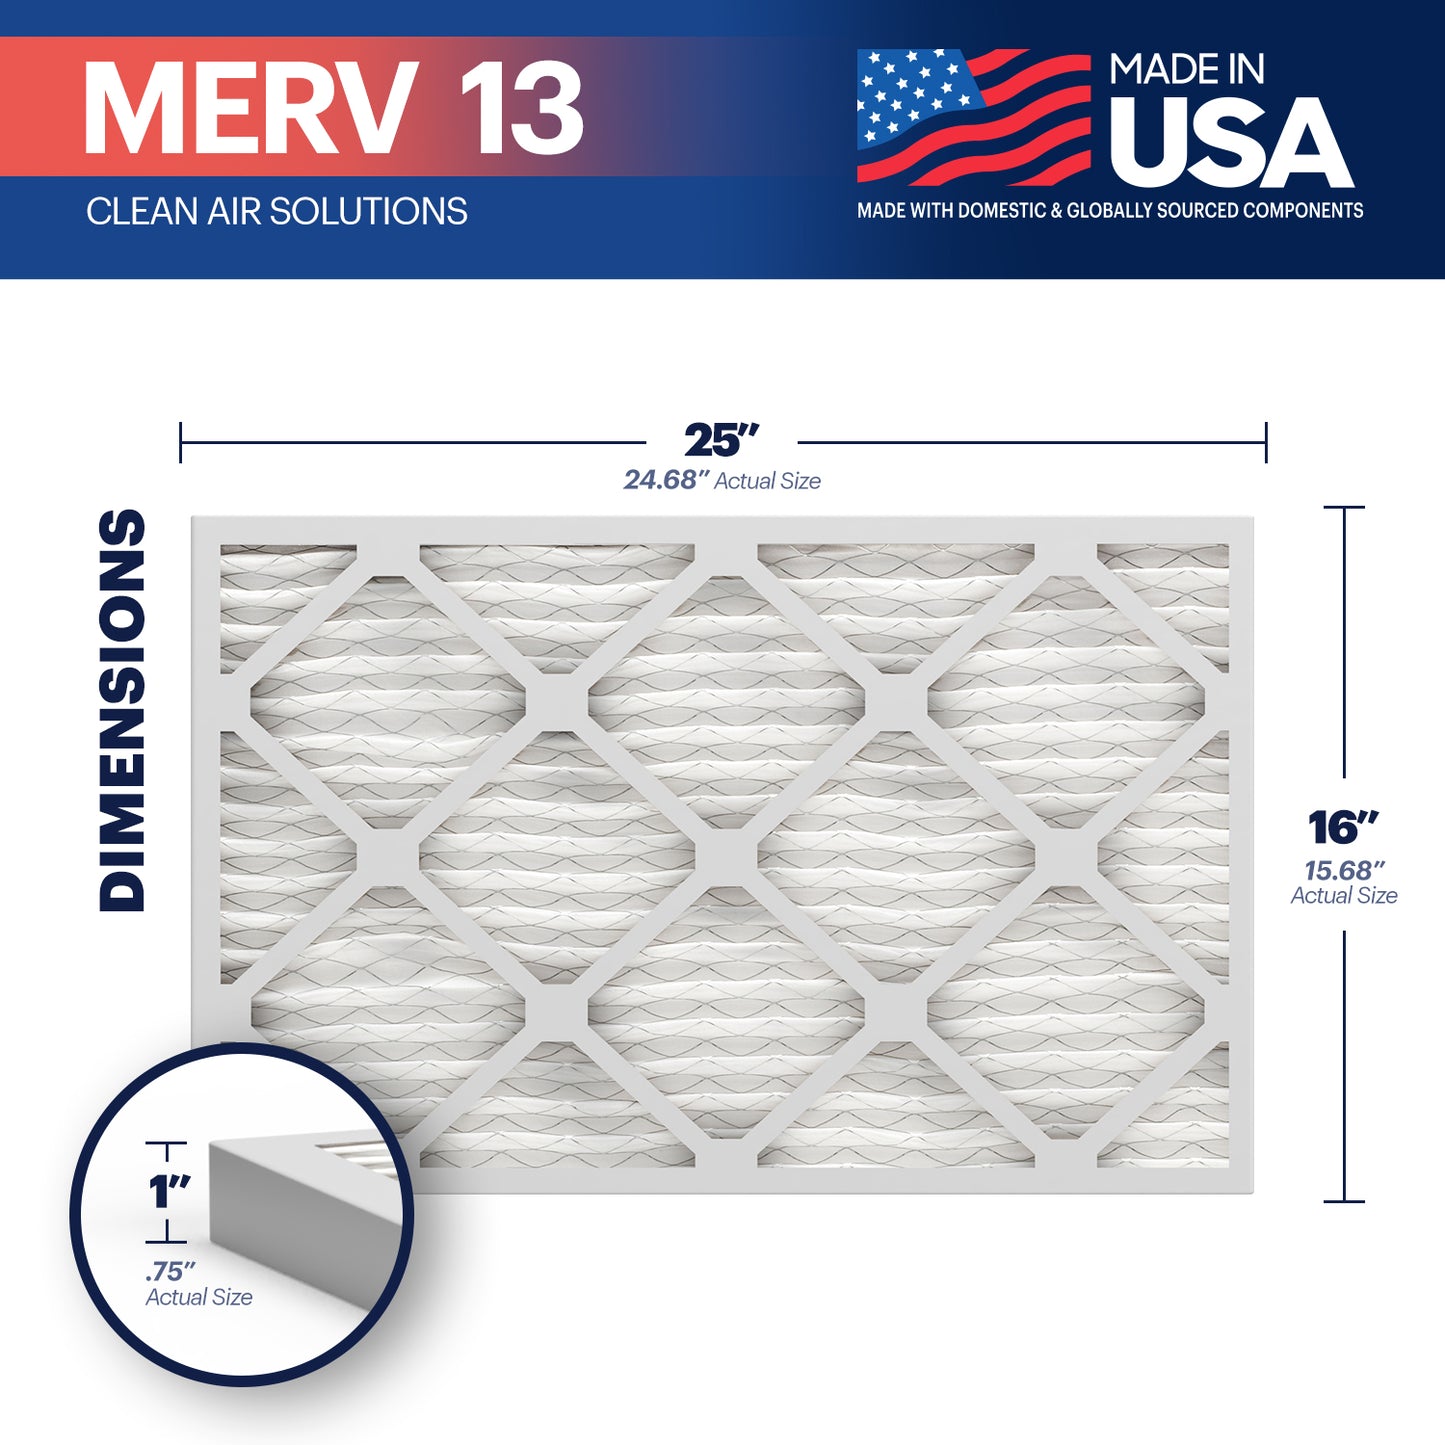 BNX 16x25x1 MERV 13 Pleated Air Filter – Made in USA (4-Pack)